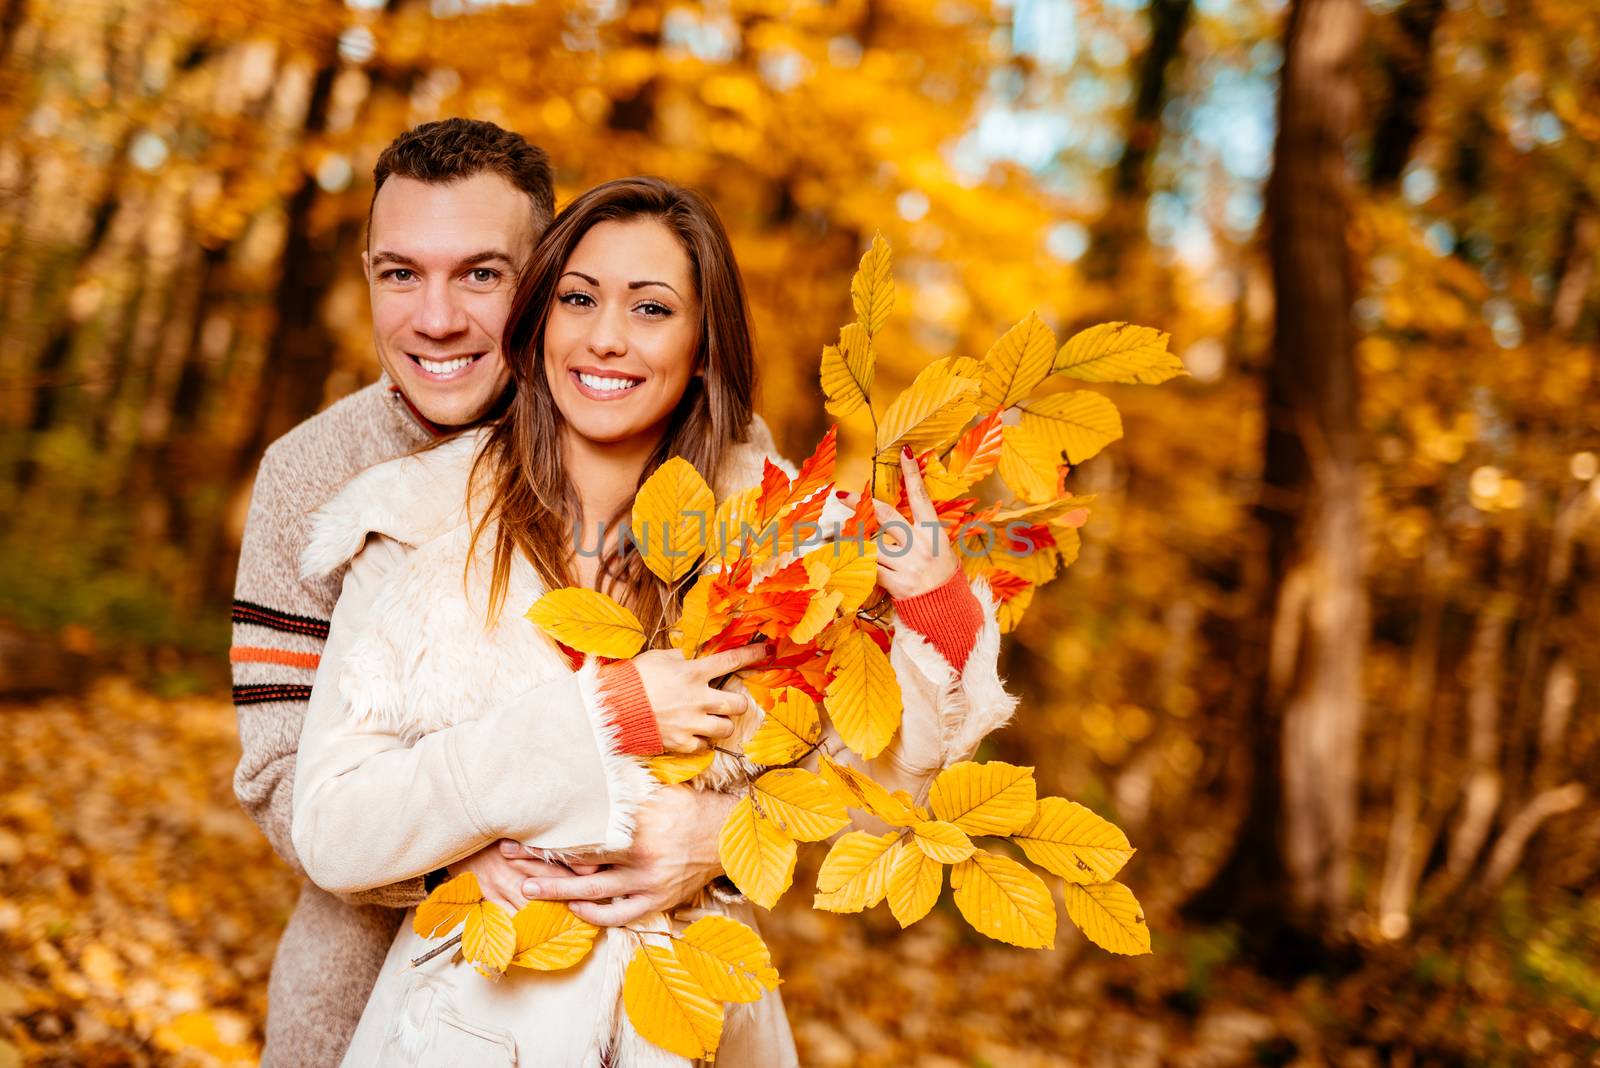 Portrait of a young smiling couple enjoying in sunny forest in autumn colors.